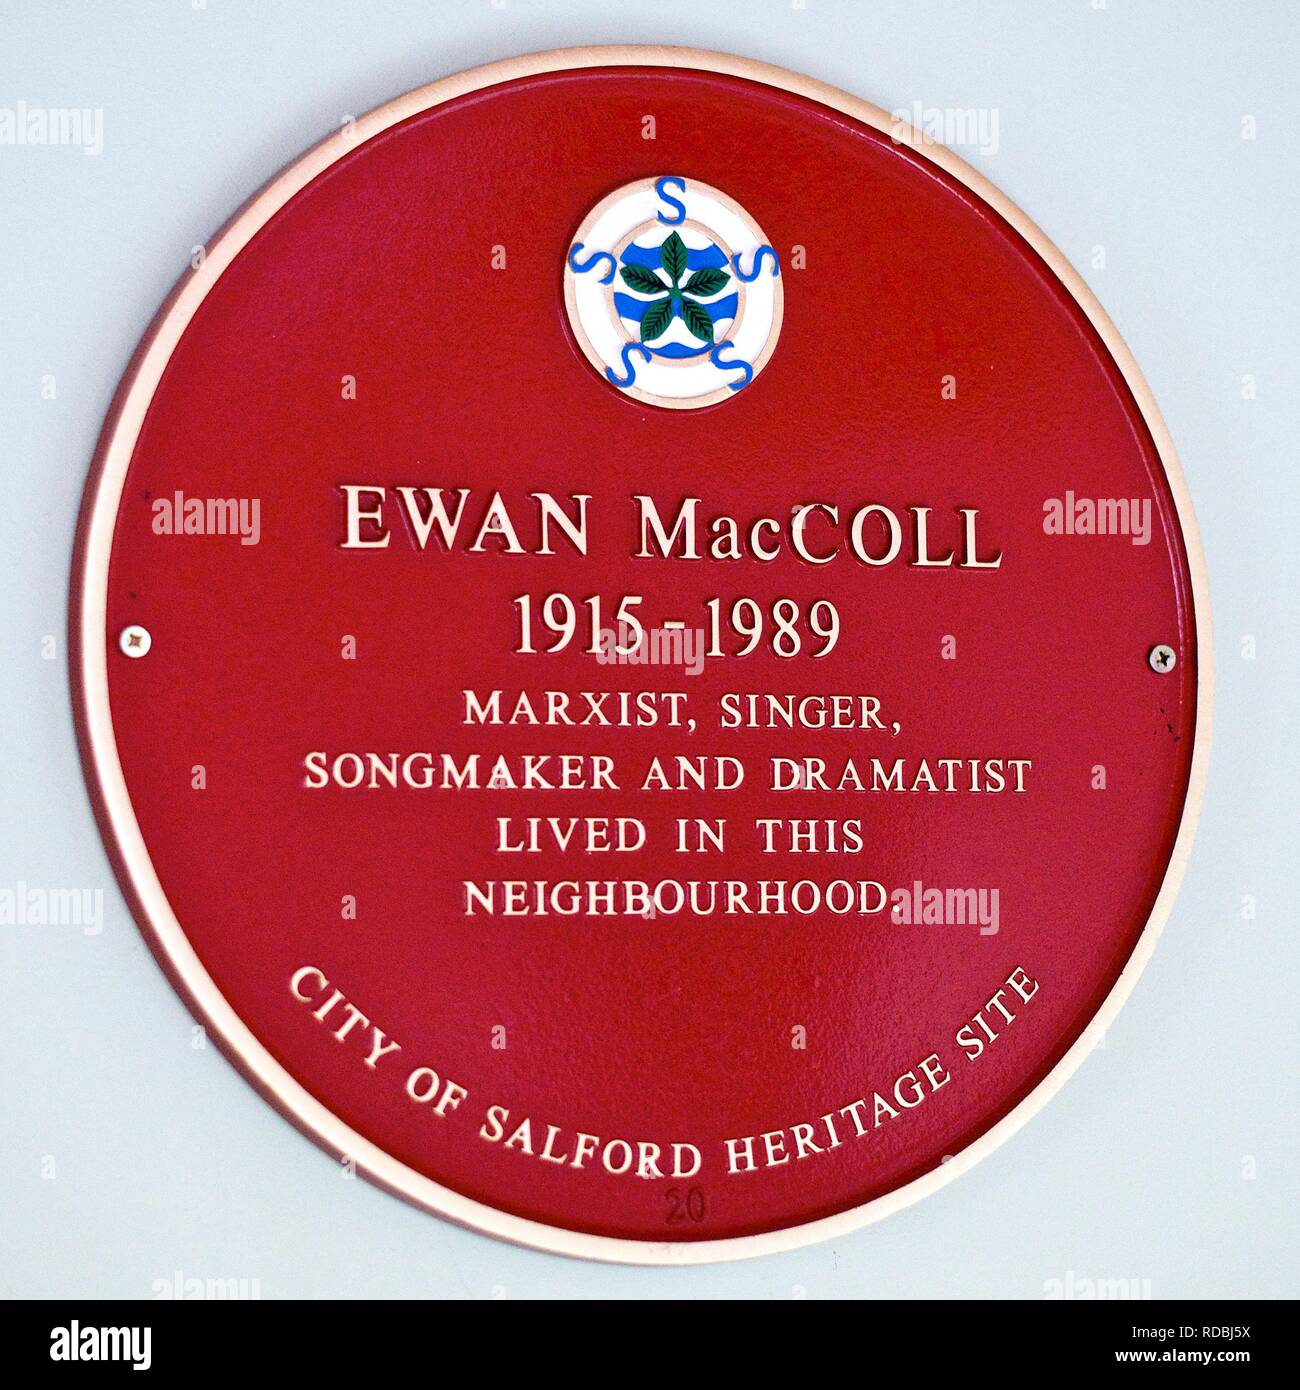 Ewan MacColl 1915-1989  Marxist, Singer, Songmaker and Dramatist lived in the neighbourhood, Salford Stock Photo